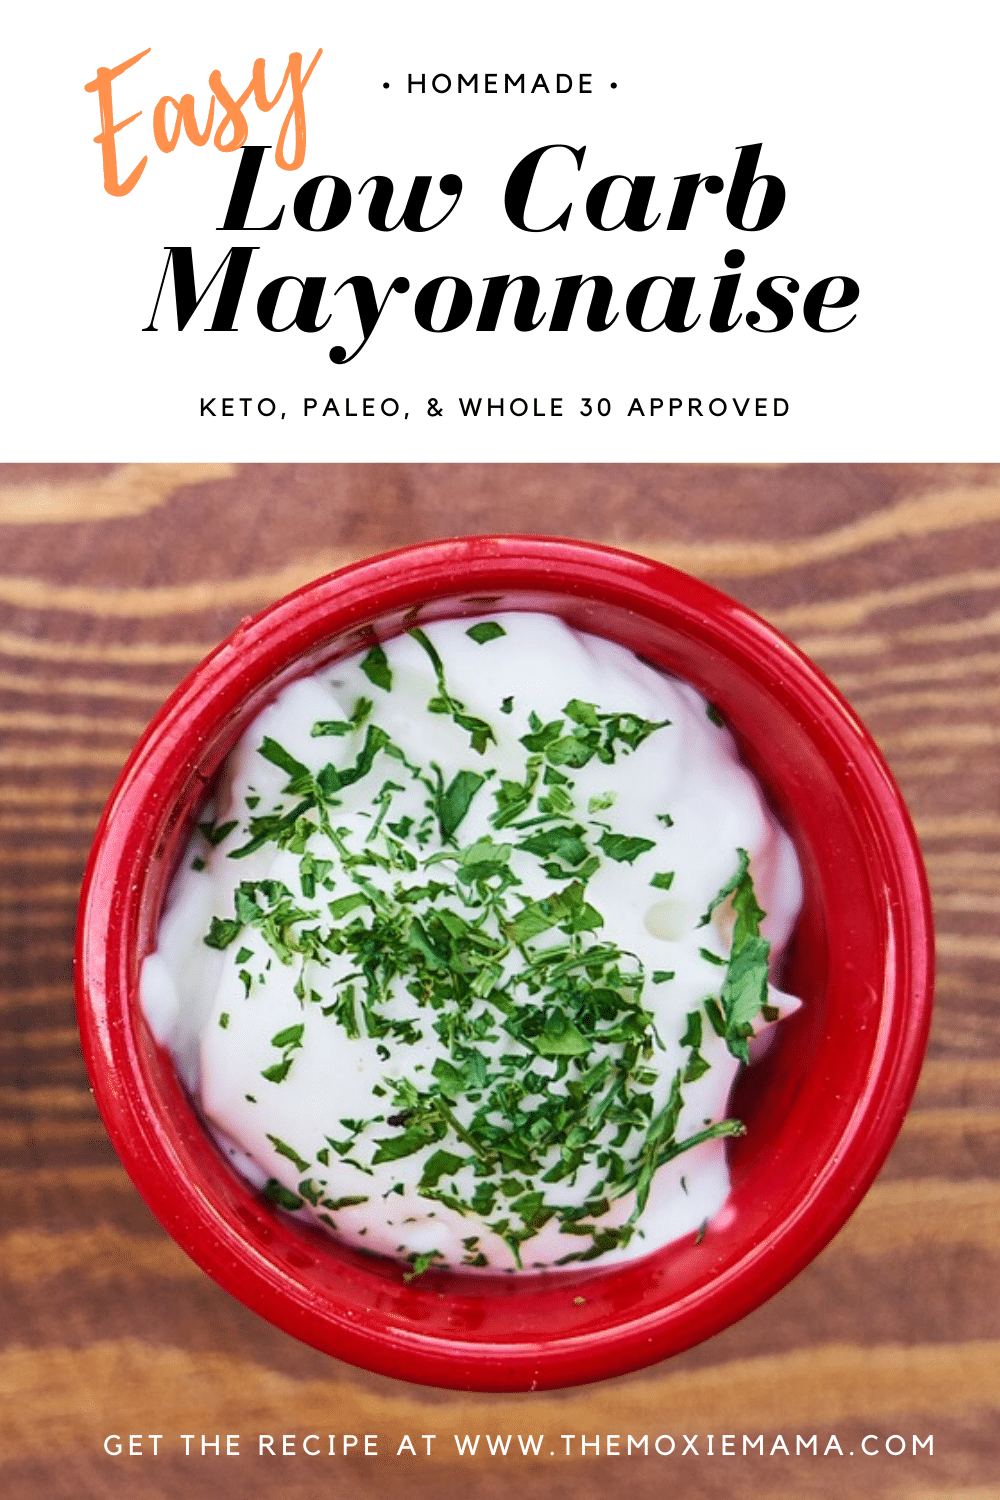 https://themoxiemama.com/wp-content/uploads/2016/01/Easy-Low-Carb-Mayonnaise-Recipe.png